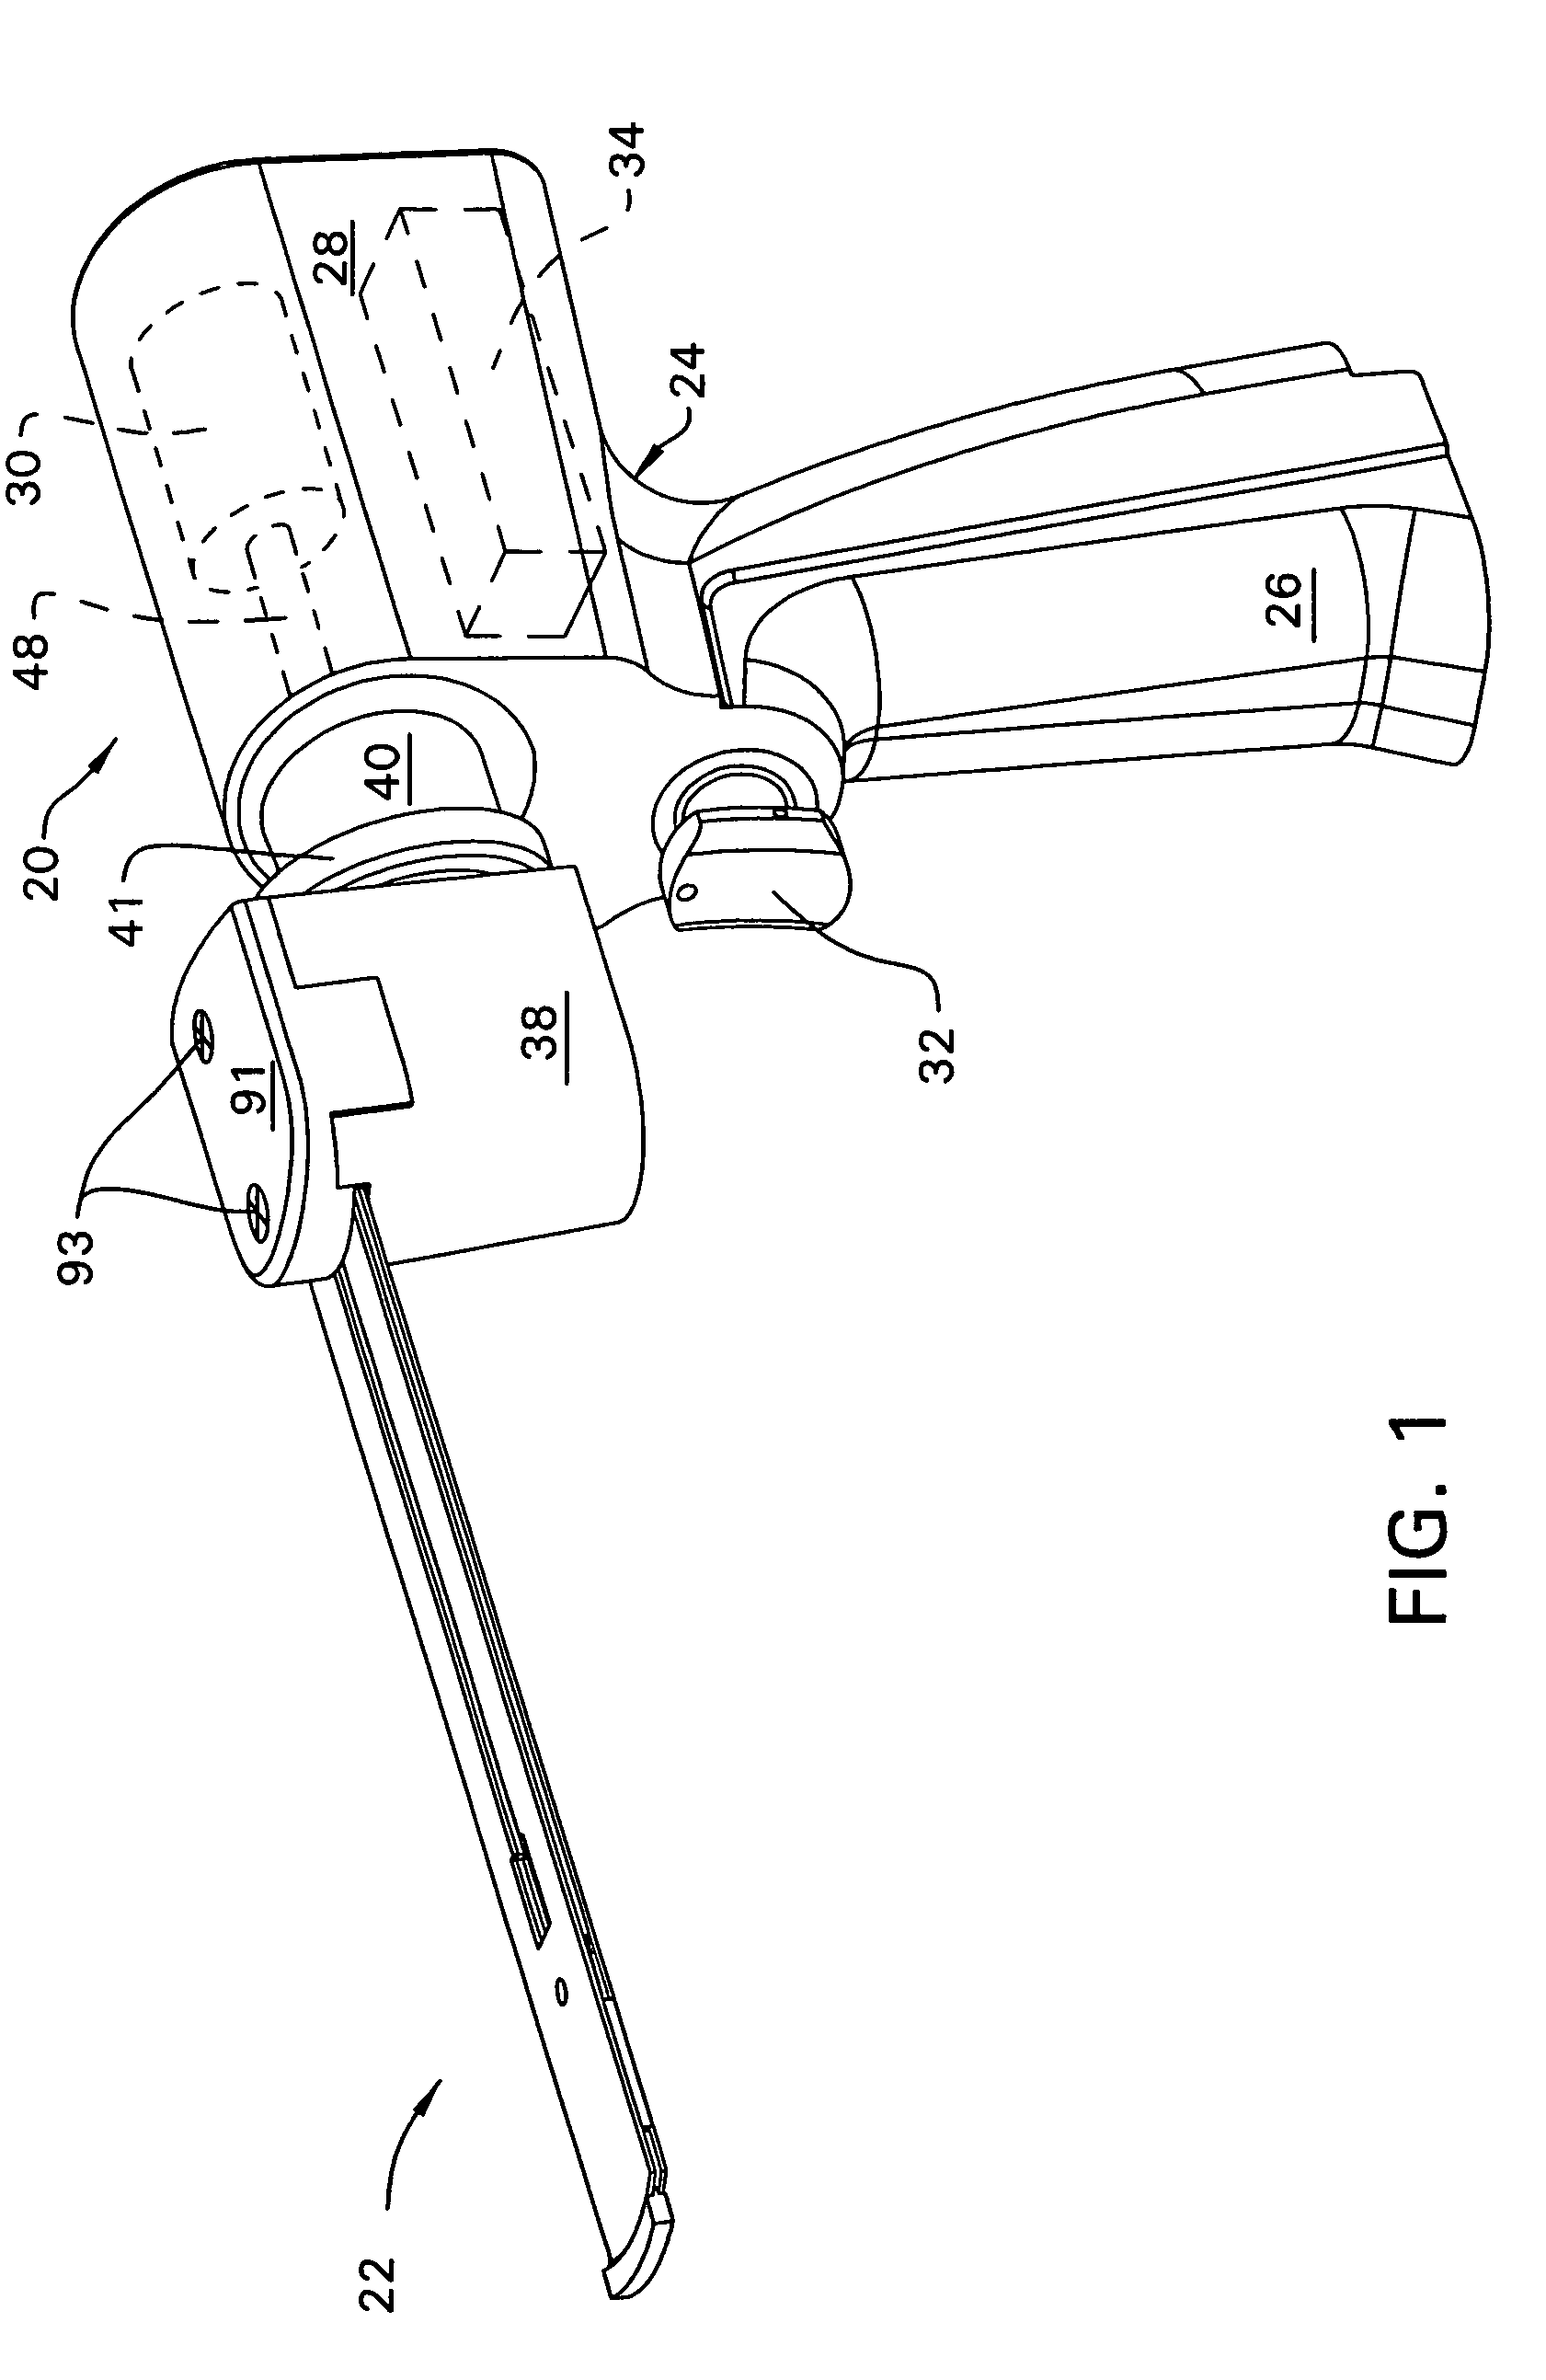 Surgical sagittal saw including a handpiece and a removable blade assembly, the blade assembly including a guide bar, a blade head capable of oscillatory movement and a drive rod for actuating the blade head